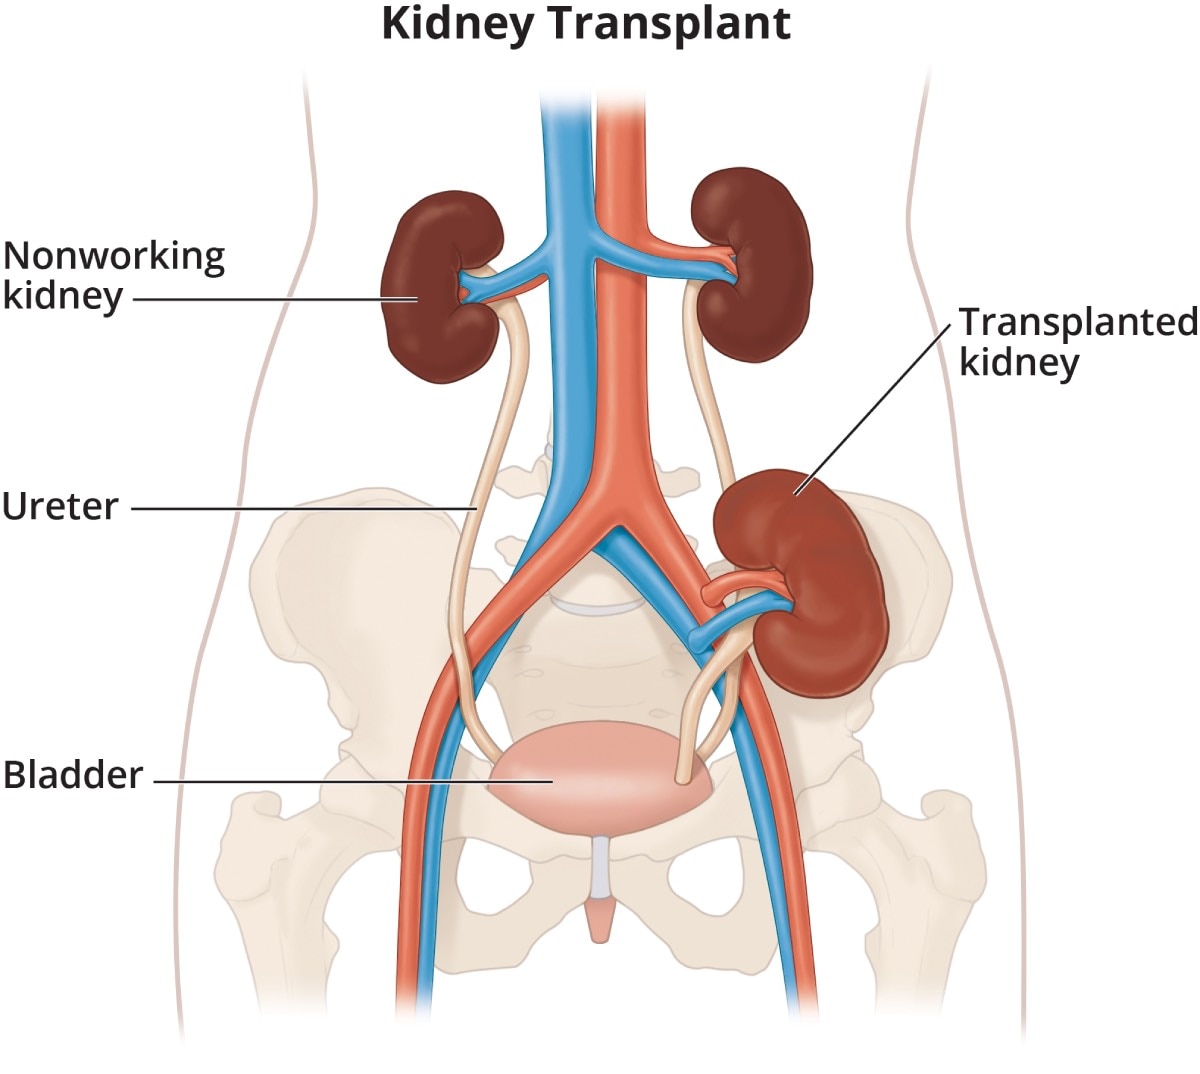 A kidney transplant showing the nonworking kidney, the working kidney, and the transplanted kidney in the pelvis.